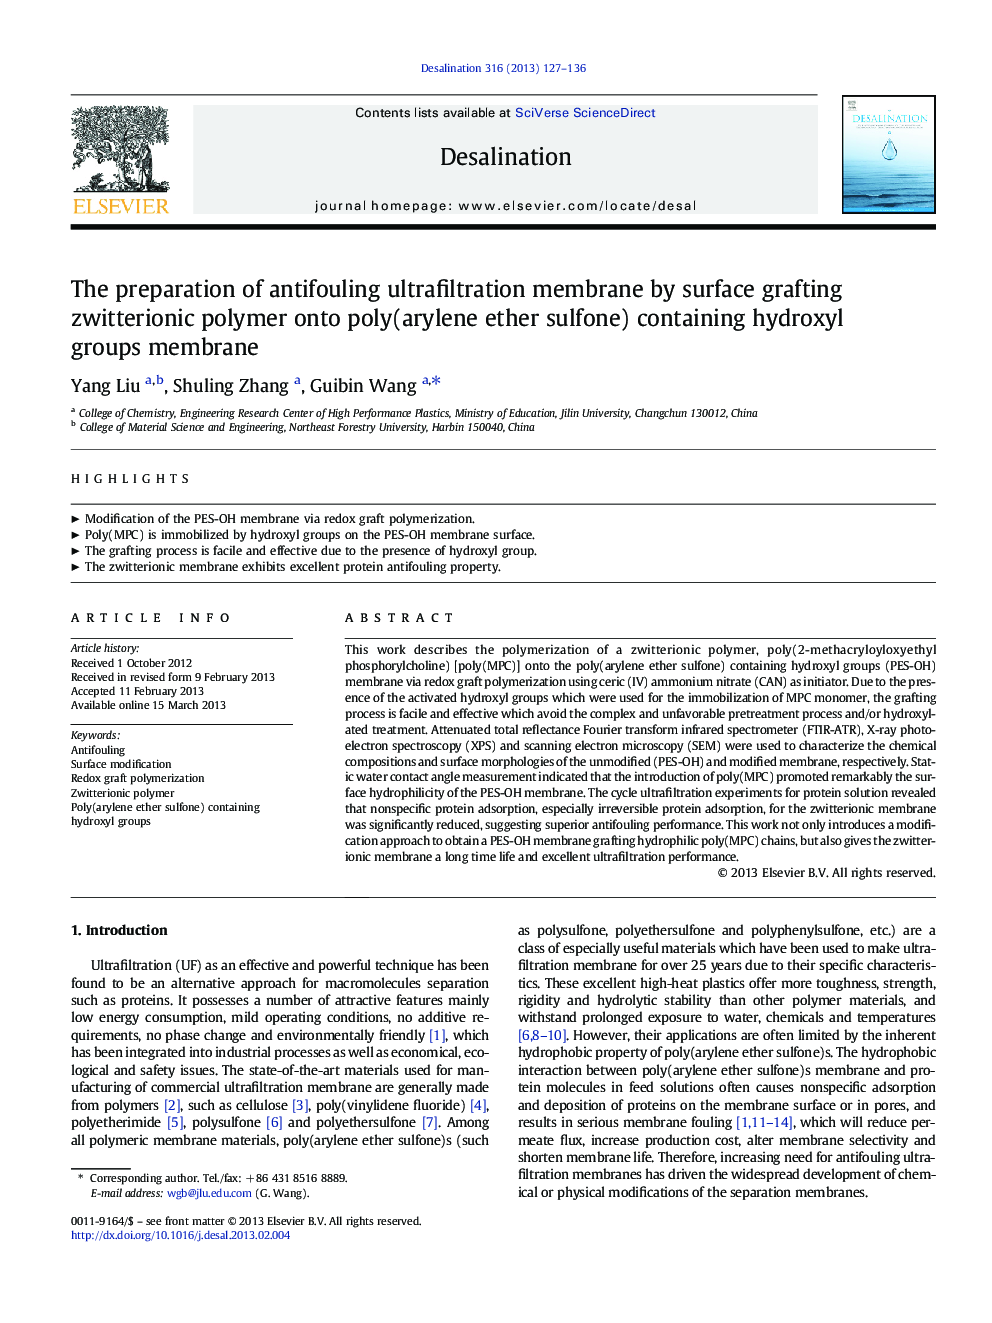 The preparation of antifouling ultrafiltration membrane by surface grafting zwitterionic polymer onto poly(arylene ether sulfone) containing hydroxyl groups membrane